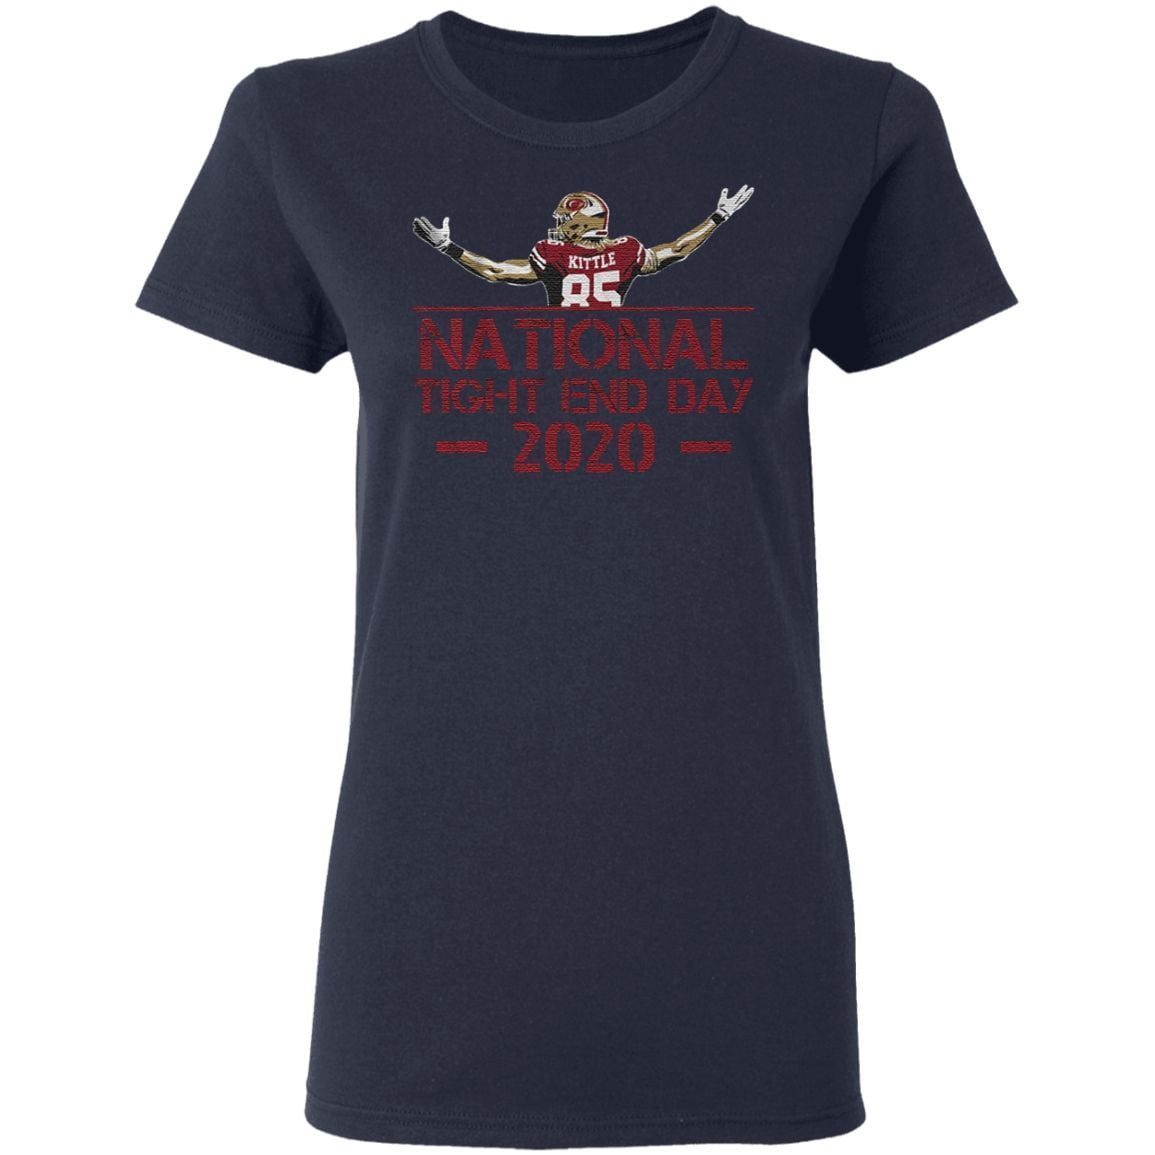 national tight end day 2020 t shirt